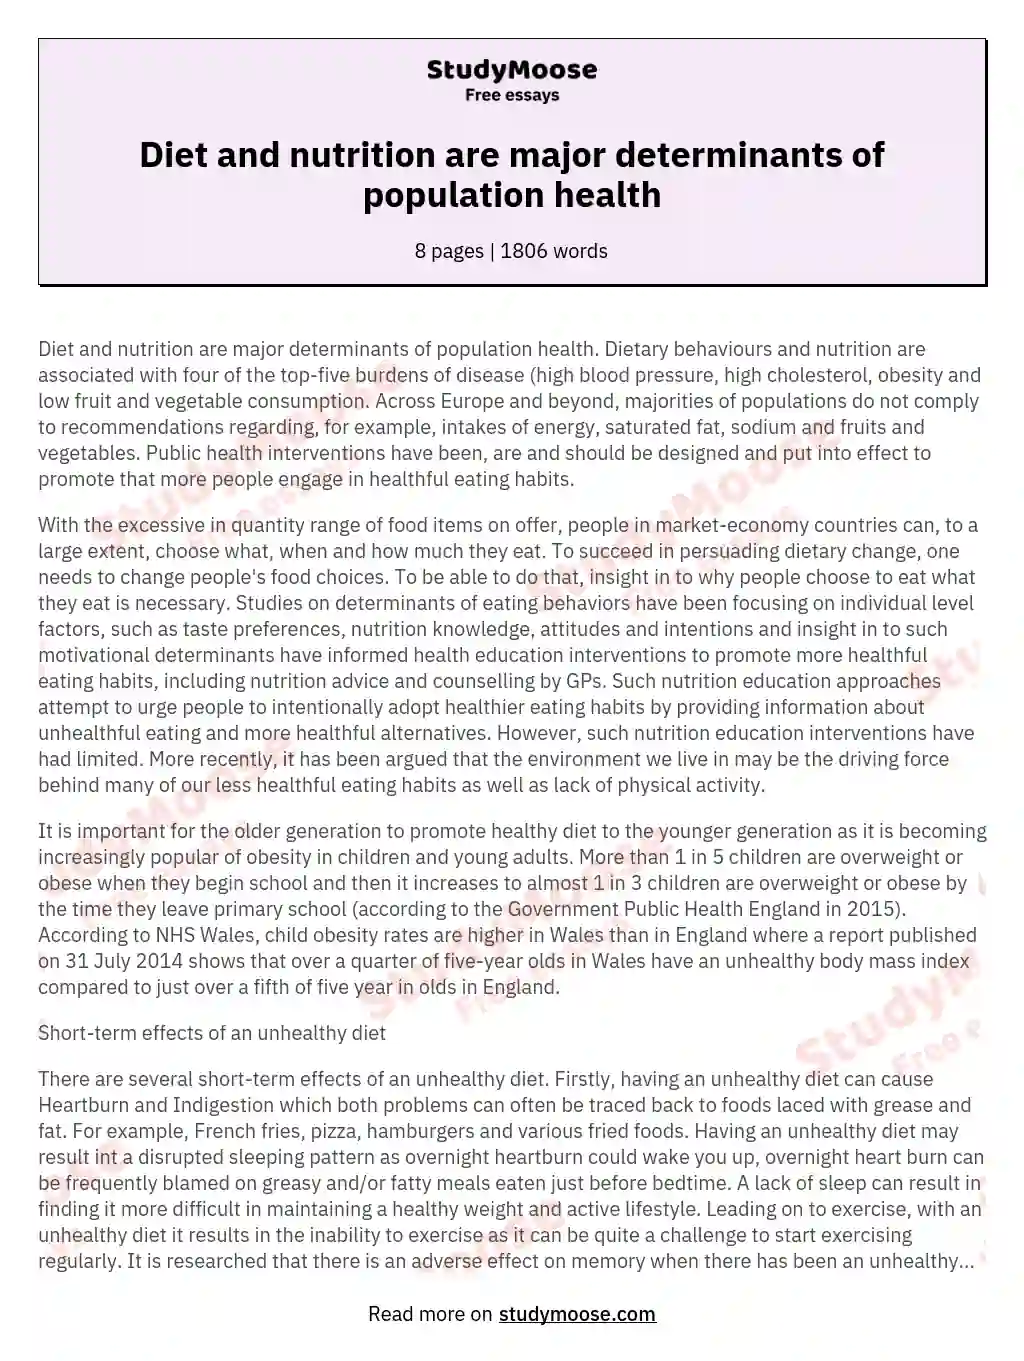 Diet and nutrition are major determinants of population health essay